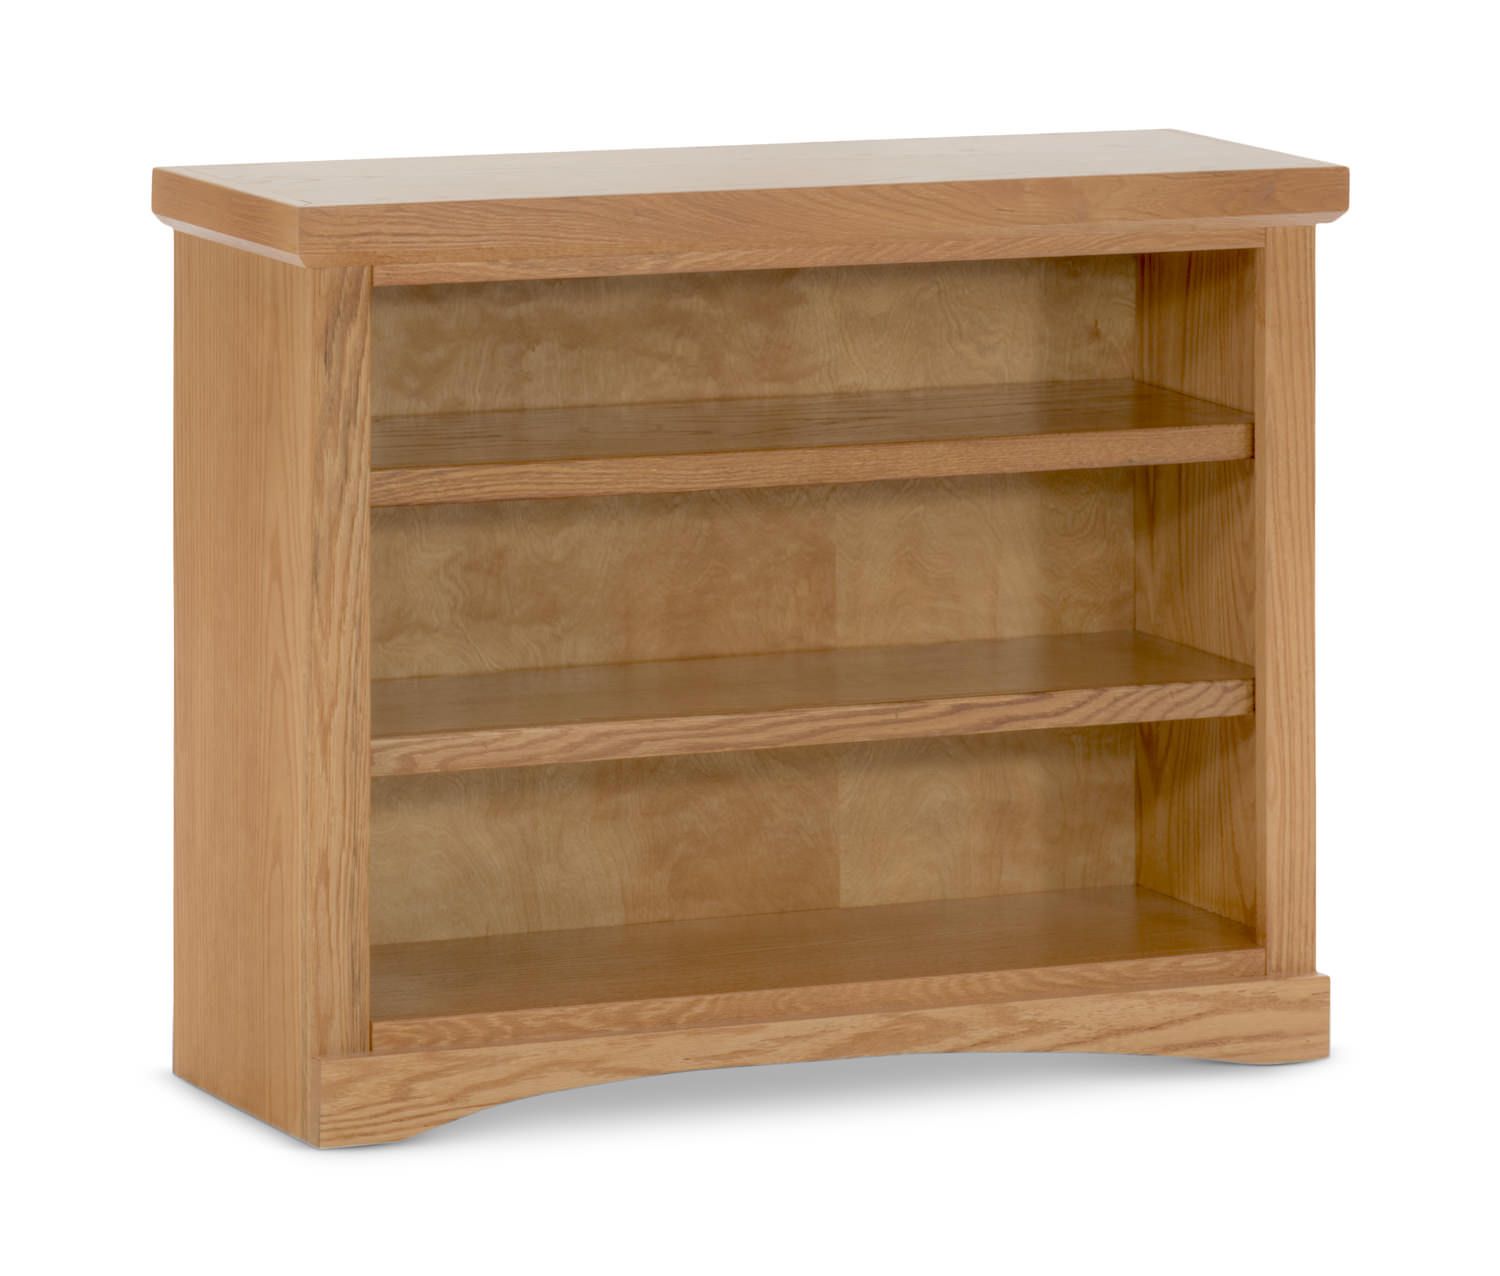 36″ Wide Traditional Oak Bookcasedirect | Hom Furniture Throughout Oak Bookcases (View 13 of 15)